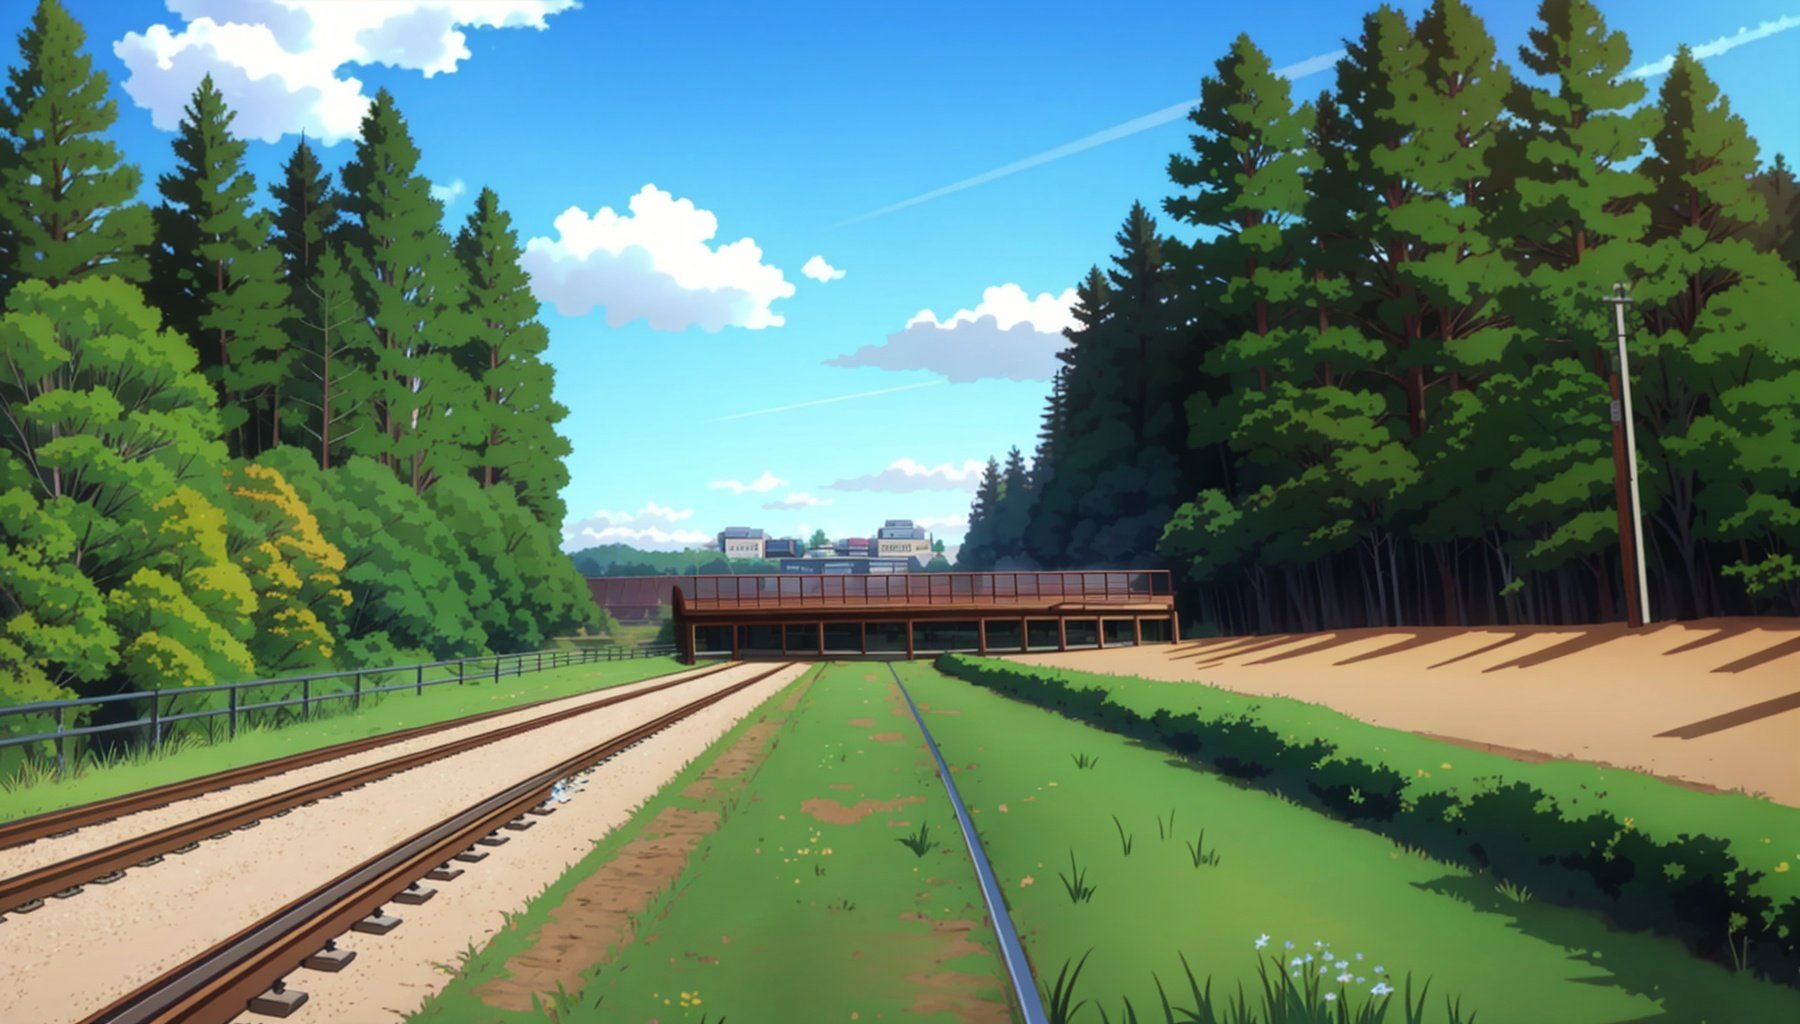 Pokemon Gotcha Style, vanishing point, train tracks, train rail, gravel, scenery, outdoors, no humans, tree, grass, day, sky, cloud, sunlight, nature, stairs, forest, building, house, blue sky, ruins